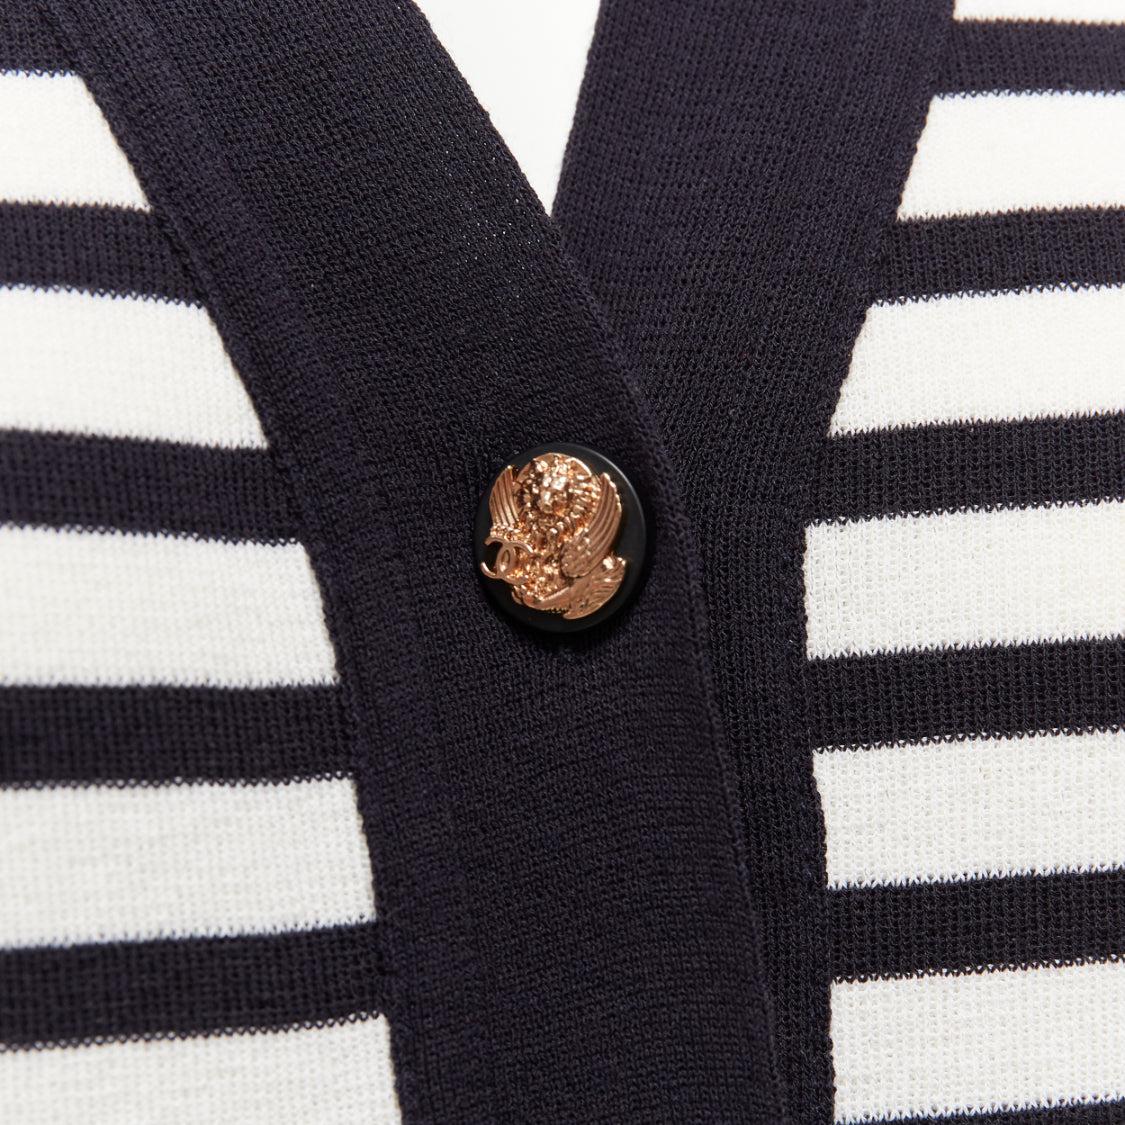 CHANEL black white striped cotton blend gold CC buttons cardigan FR38 M
Reference: NKLL/A00162
Brand: Chanel
Material: Cotton, Blend
Color: Black, White
Pattern: Striped
Closure: Button
Extra Details: CC logo buttons.
Made in: